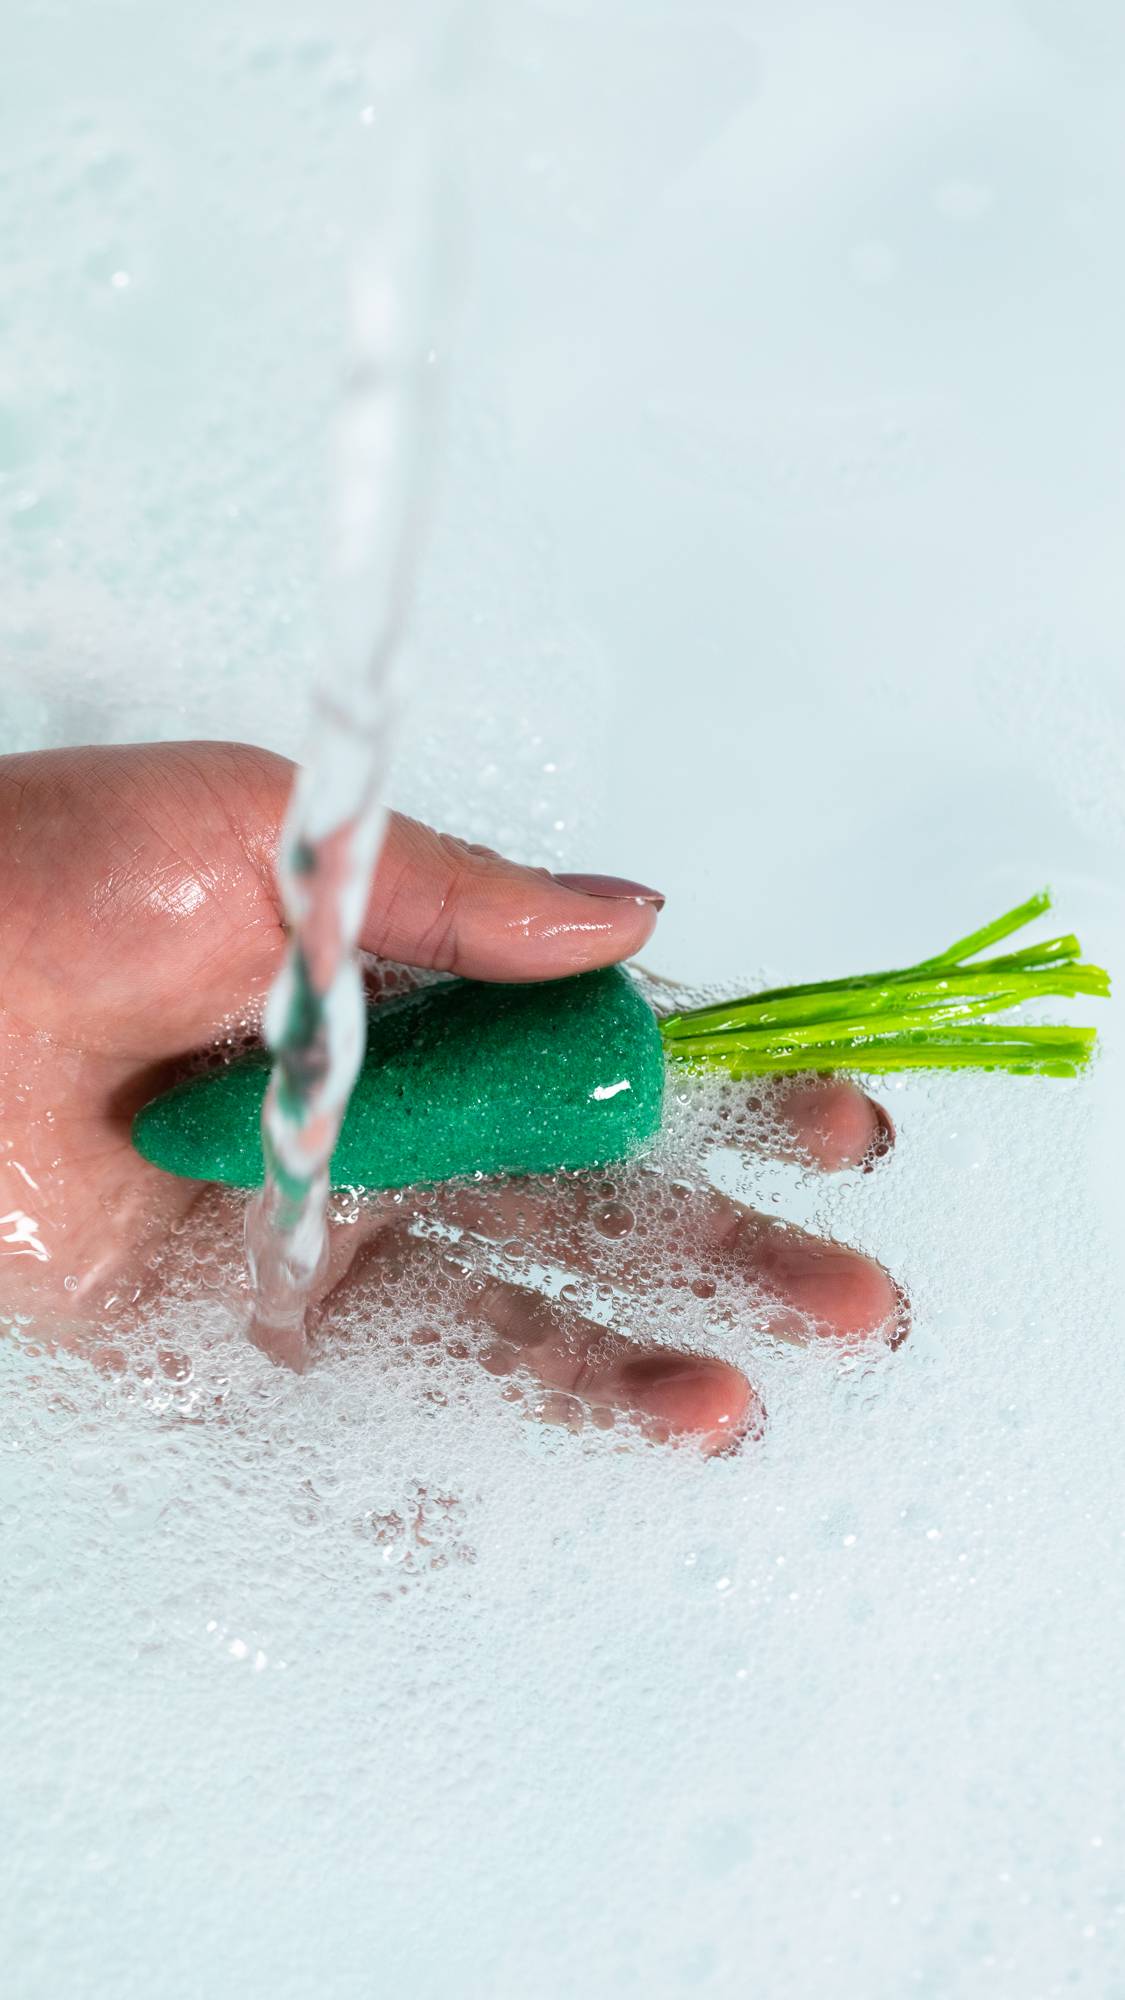 A close-up image of the model's hand holding the green carrot bubble bar under running water creating fresh, bubbly water below. 